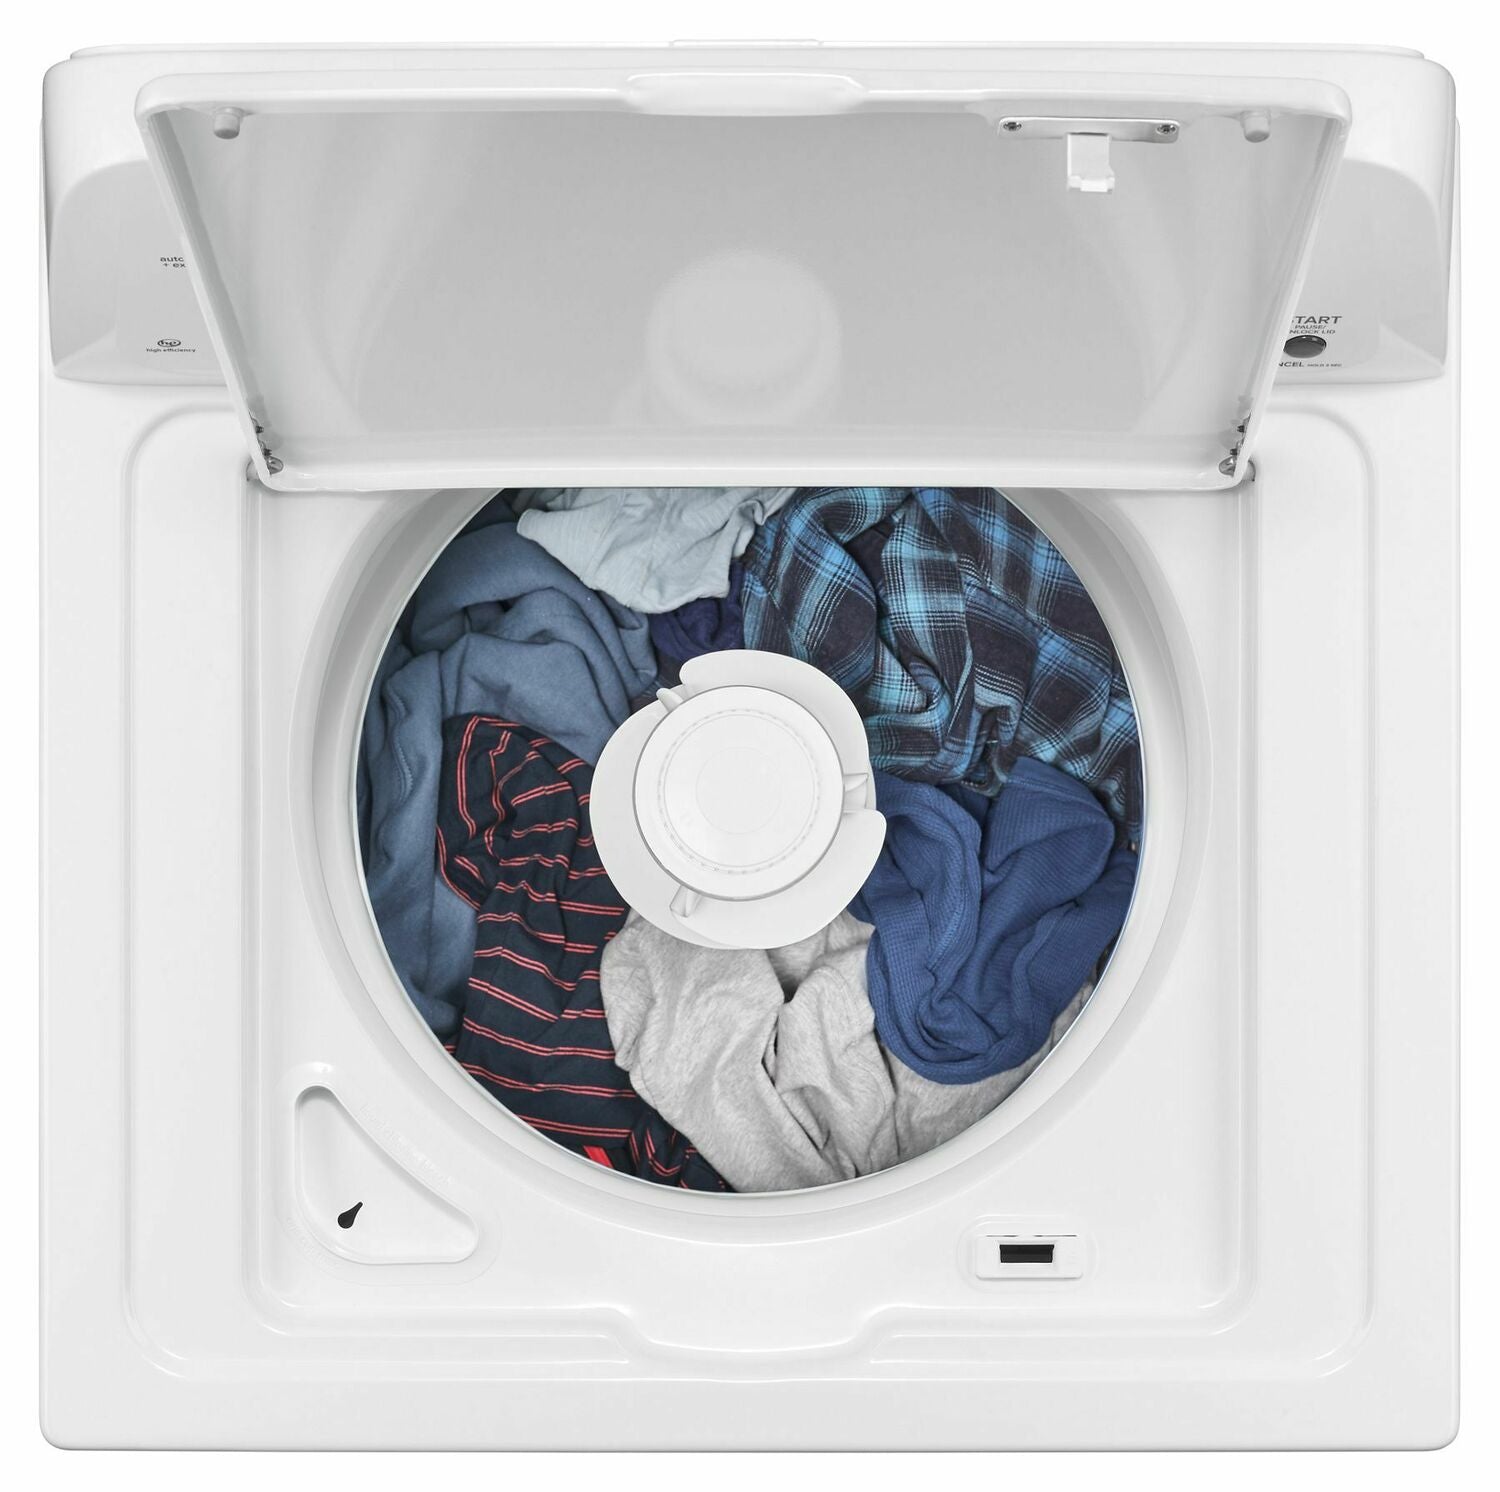 Amana NTW4516FW 3.5 Cu. Ft. Top-Load Washer With Dual Action Agitator - White